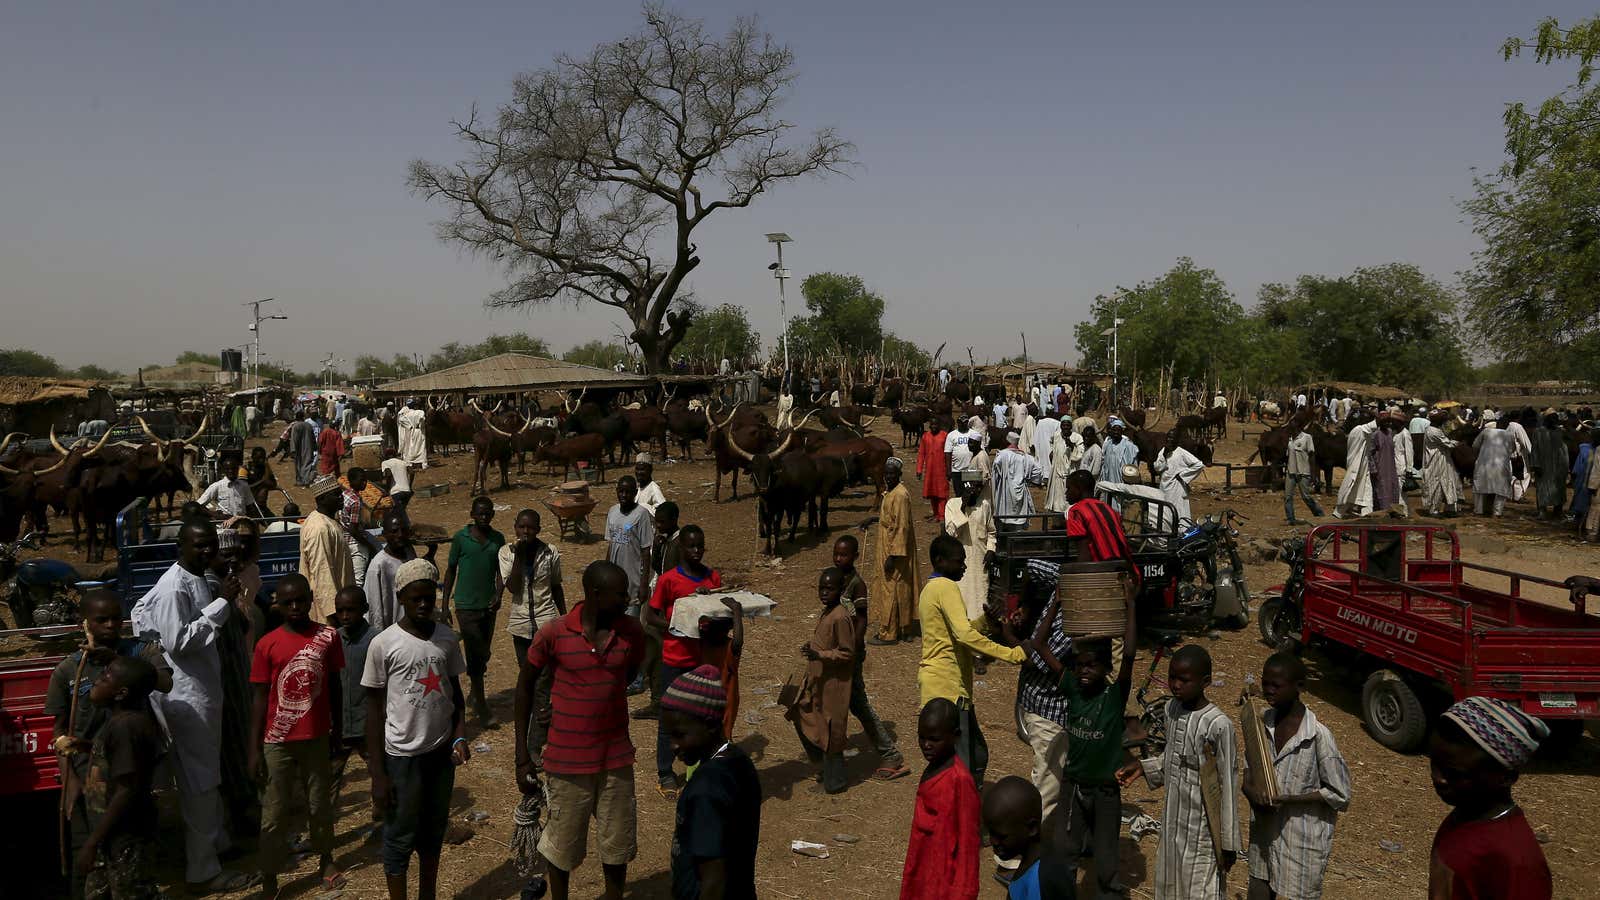 People gather at the cattle market in Maiduguri, northeast Nigeria which is starting to recover from years of Boko Haram insurgency.